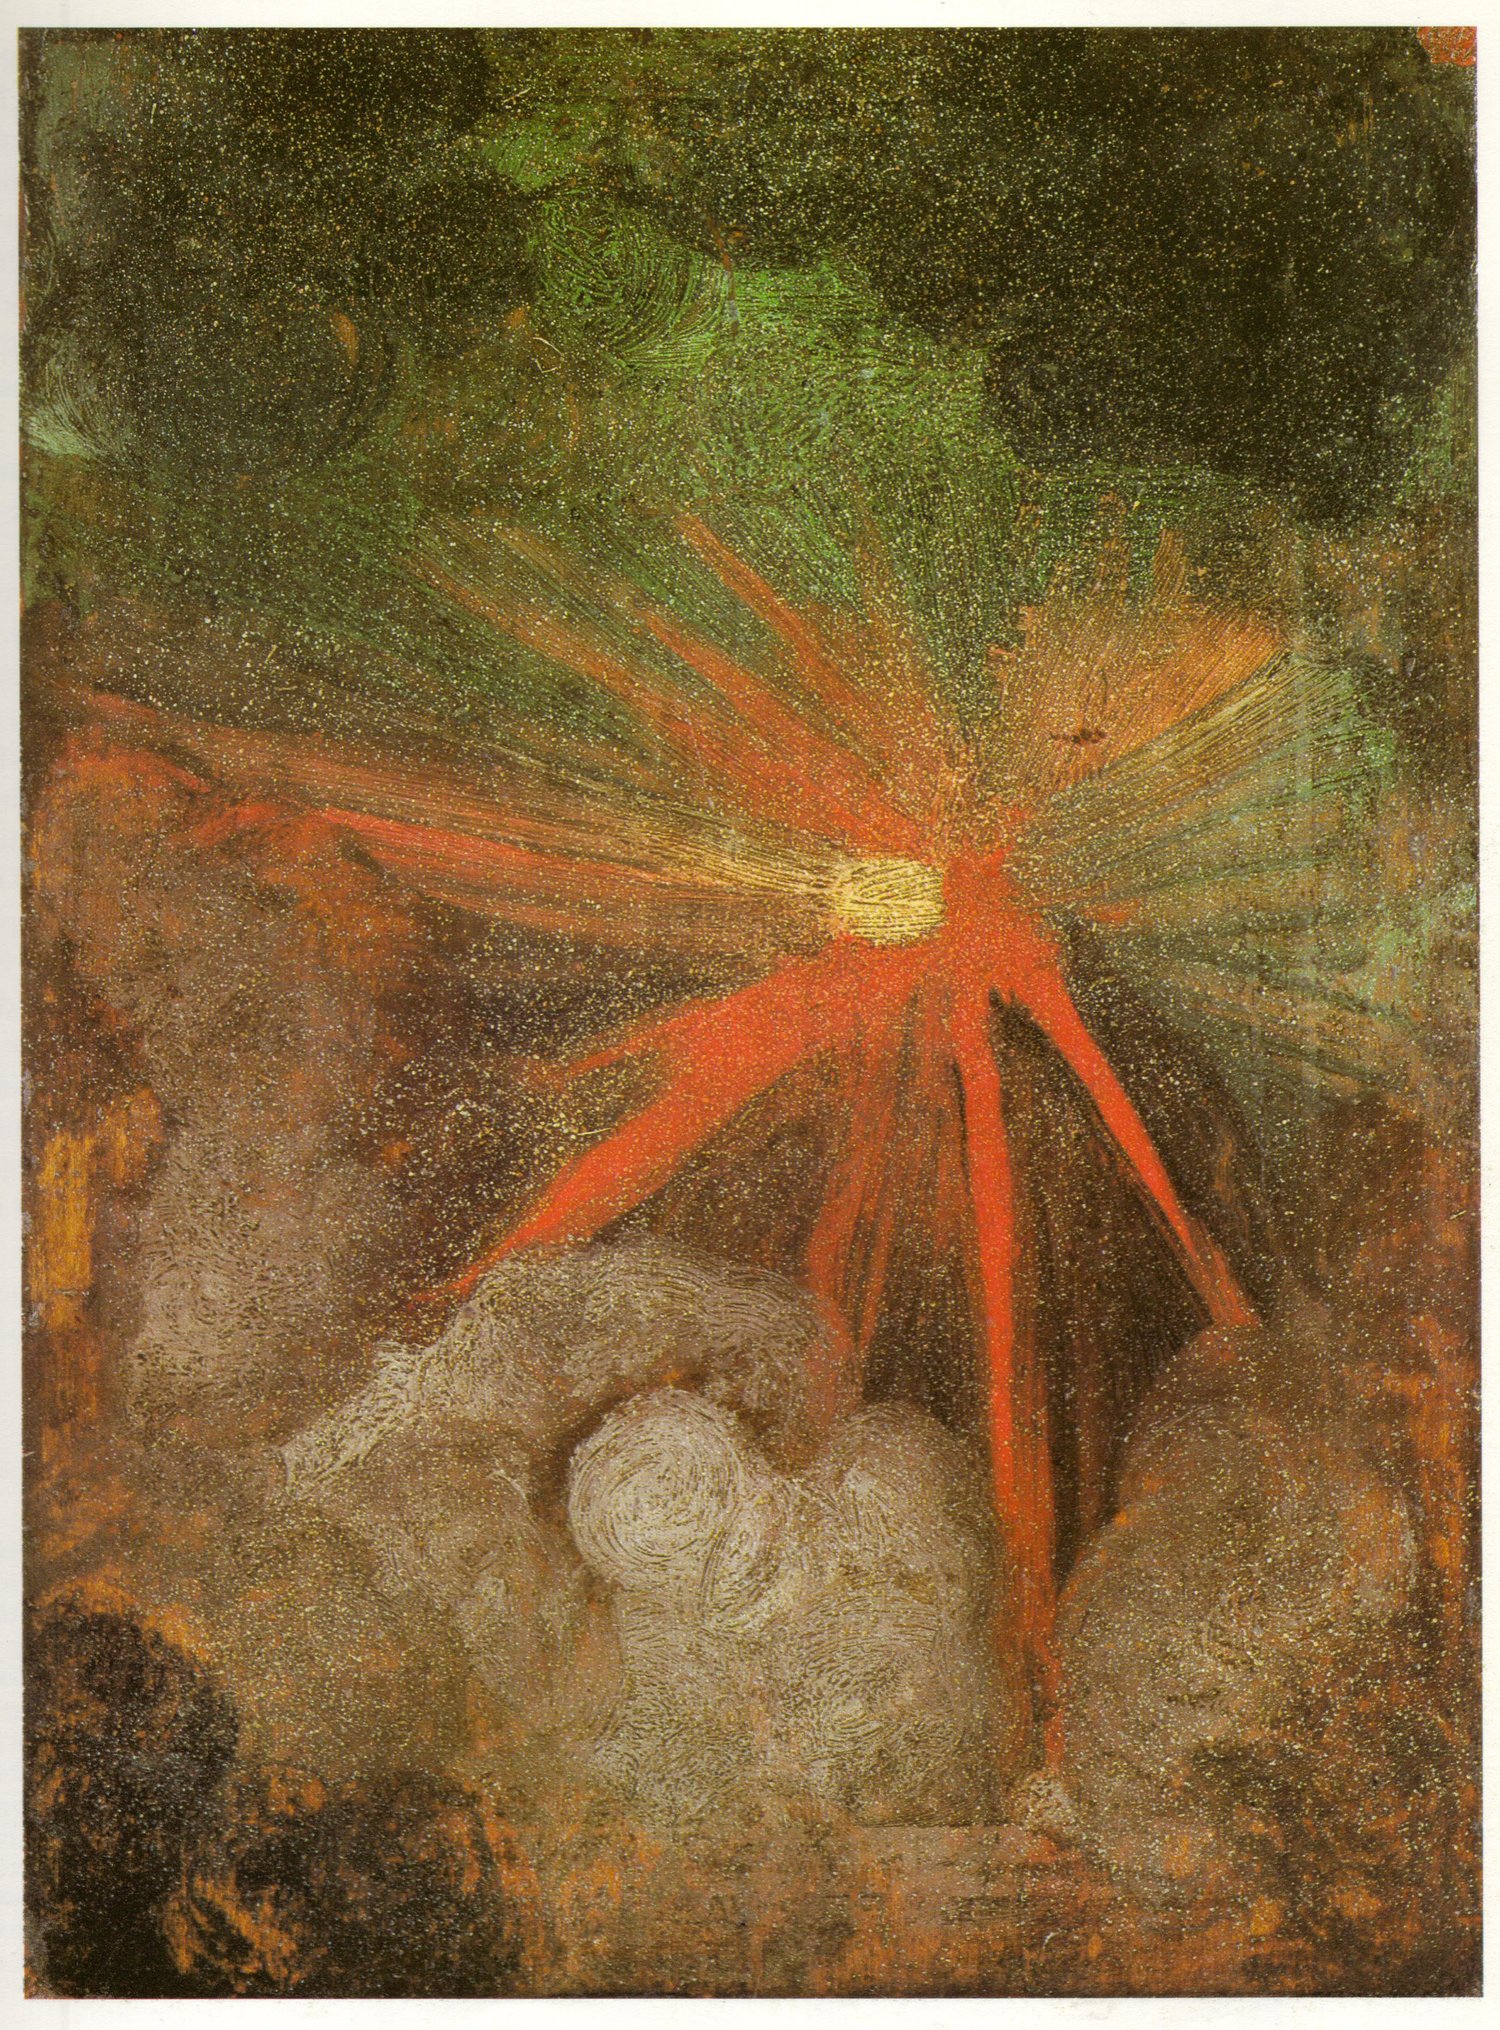 Albrecht Dürer.  Comet . Painted on the reverse of  St. Jerome in the Wilderness . Oil on panel. 9.1 x 6.7”. 1495-96.